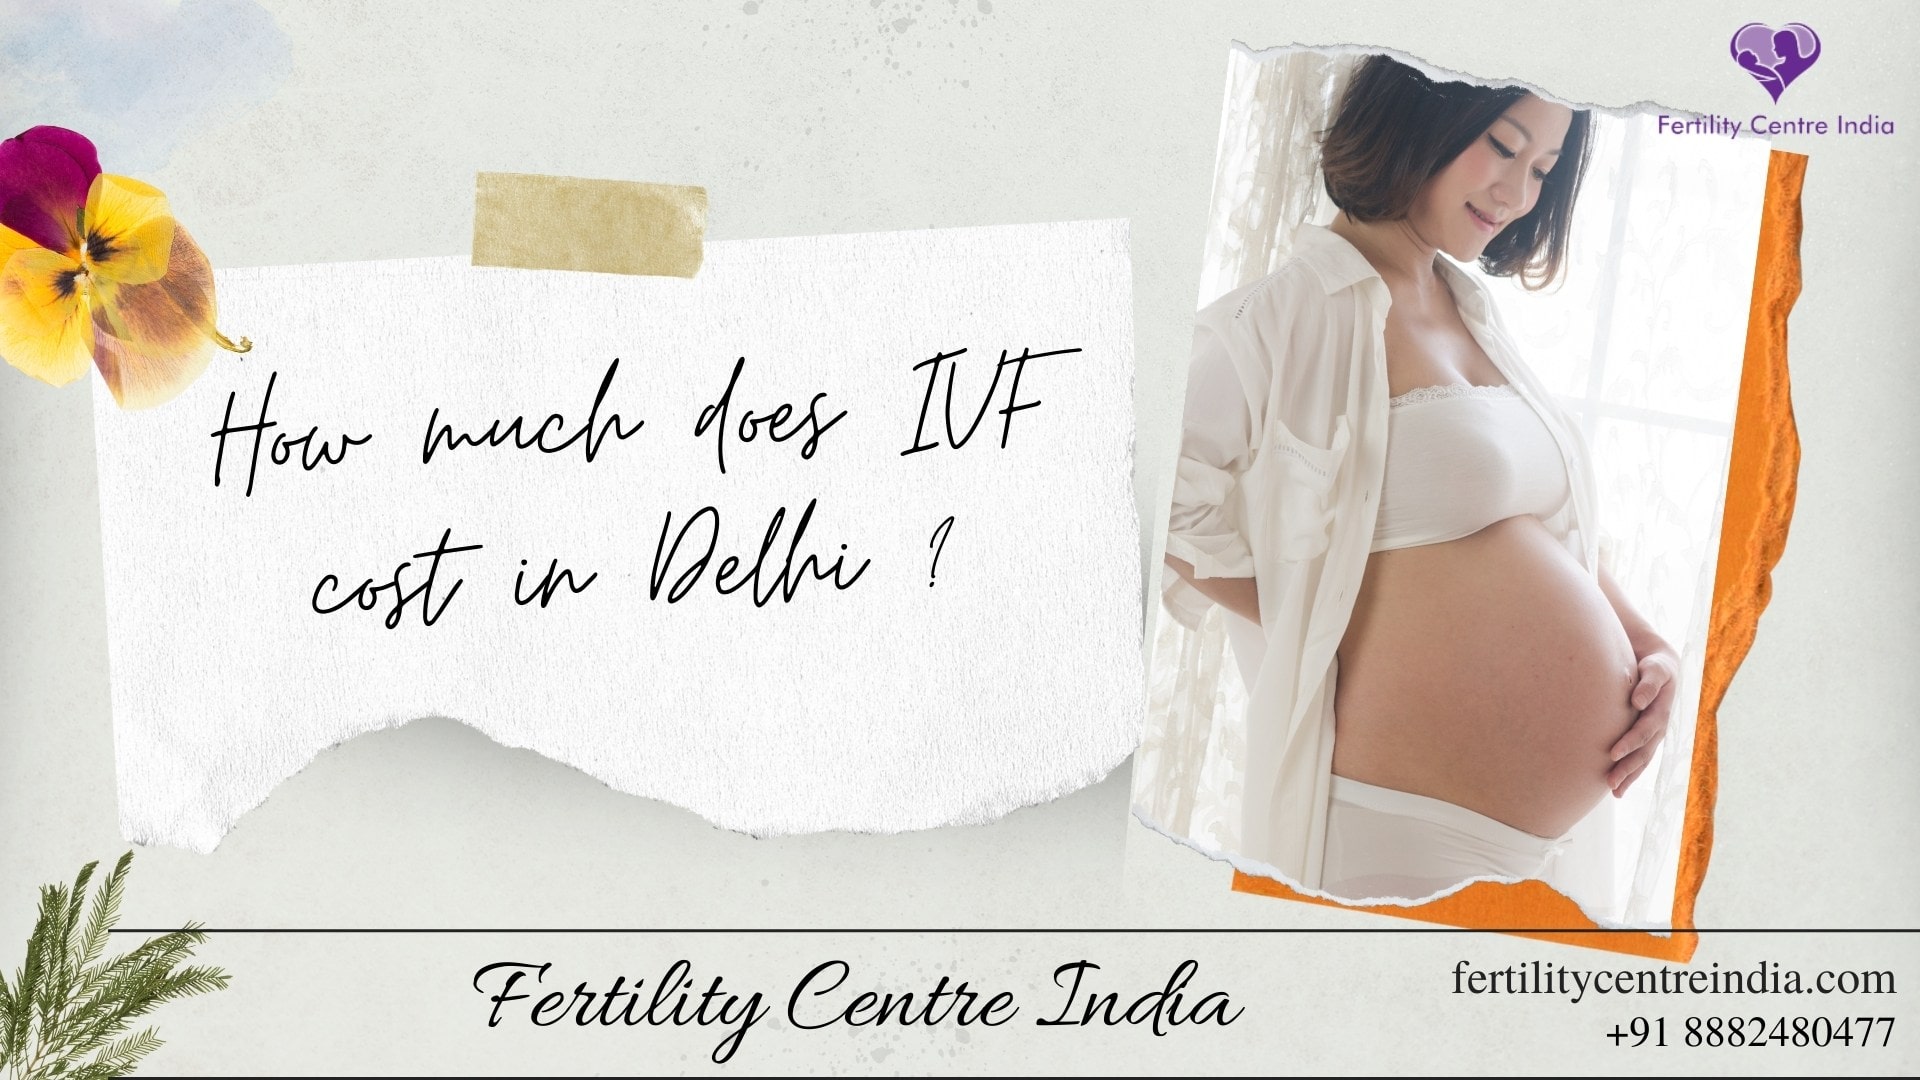 How much does IVF cost in Delhi 2022? Fertility Centre India